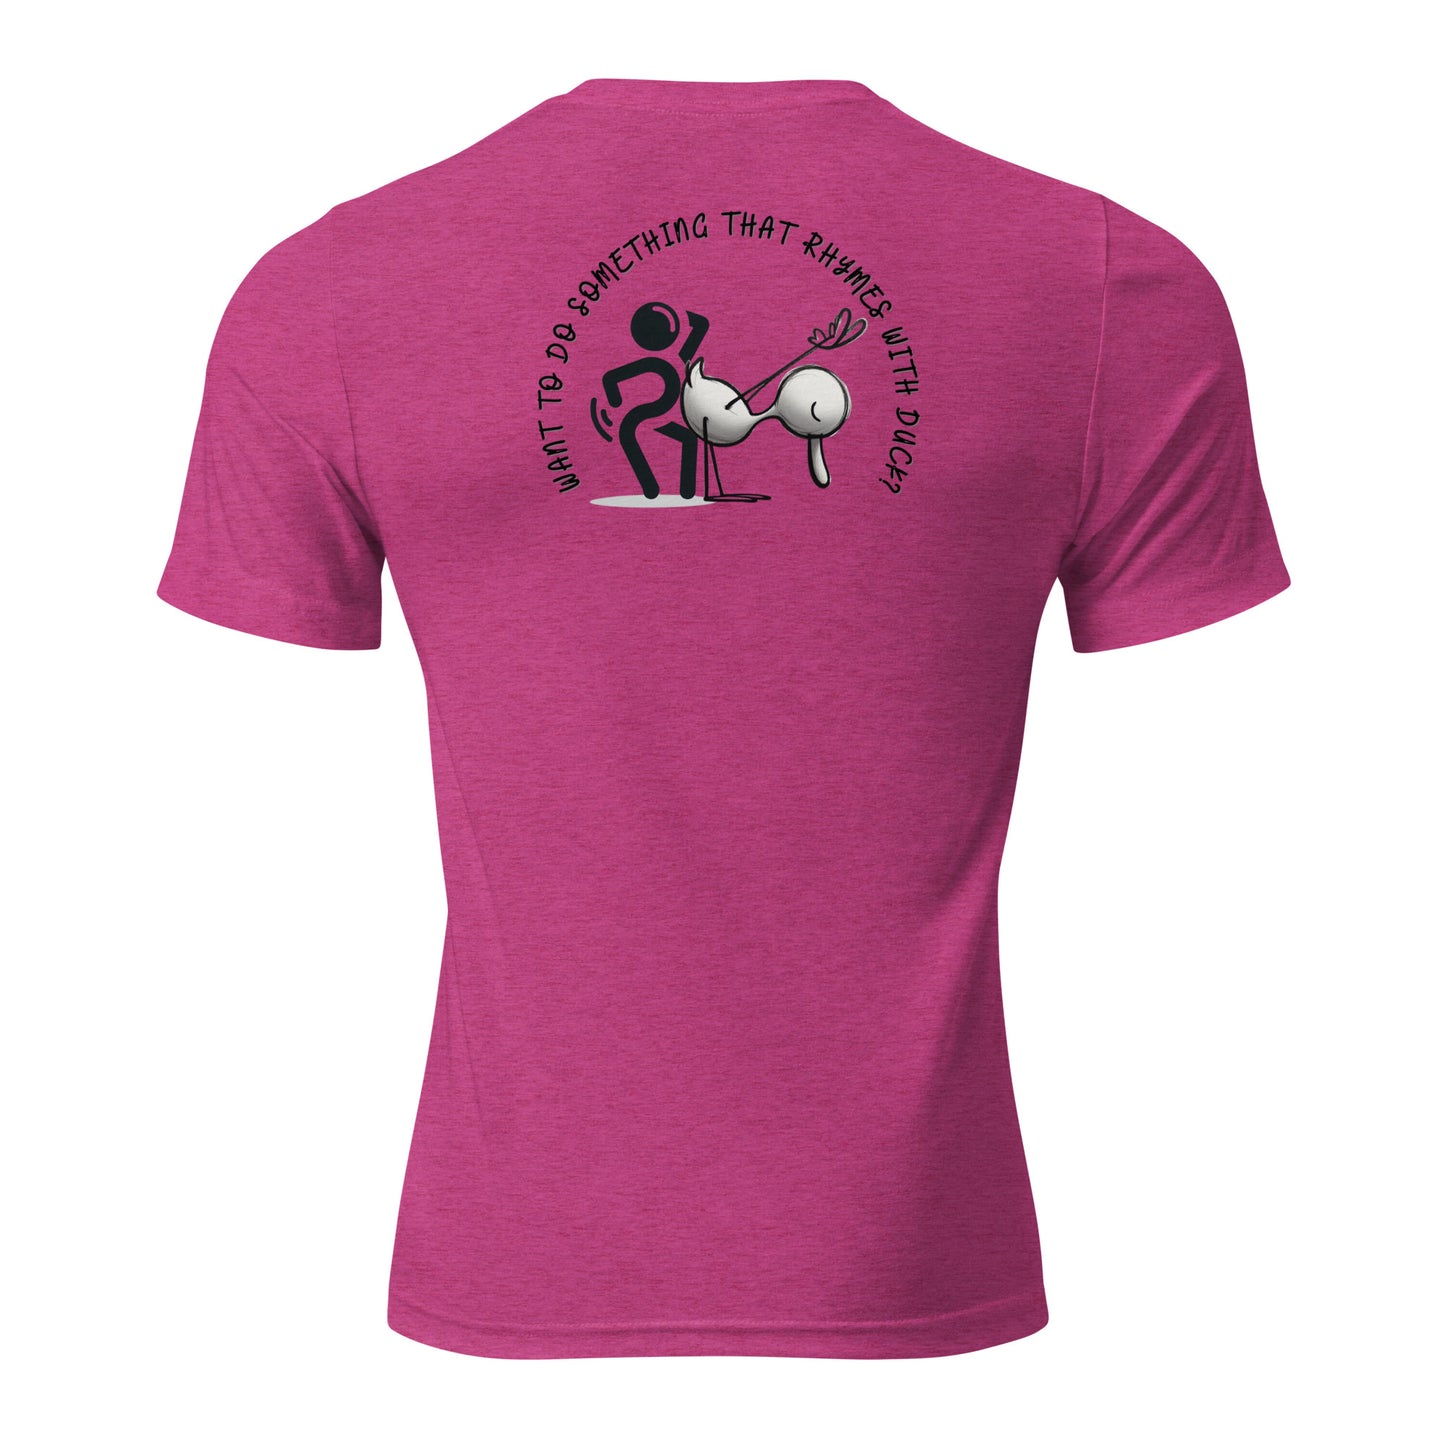 a pink t - shirt with an image of a person holding a ball